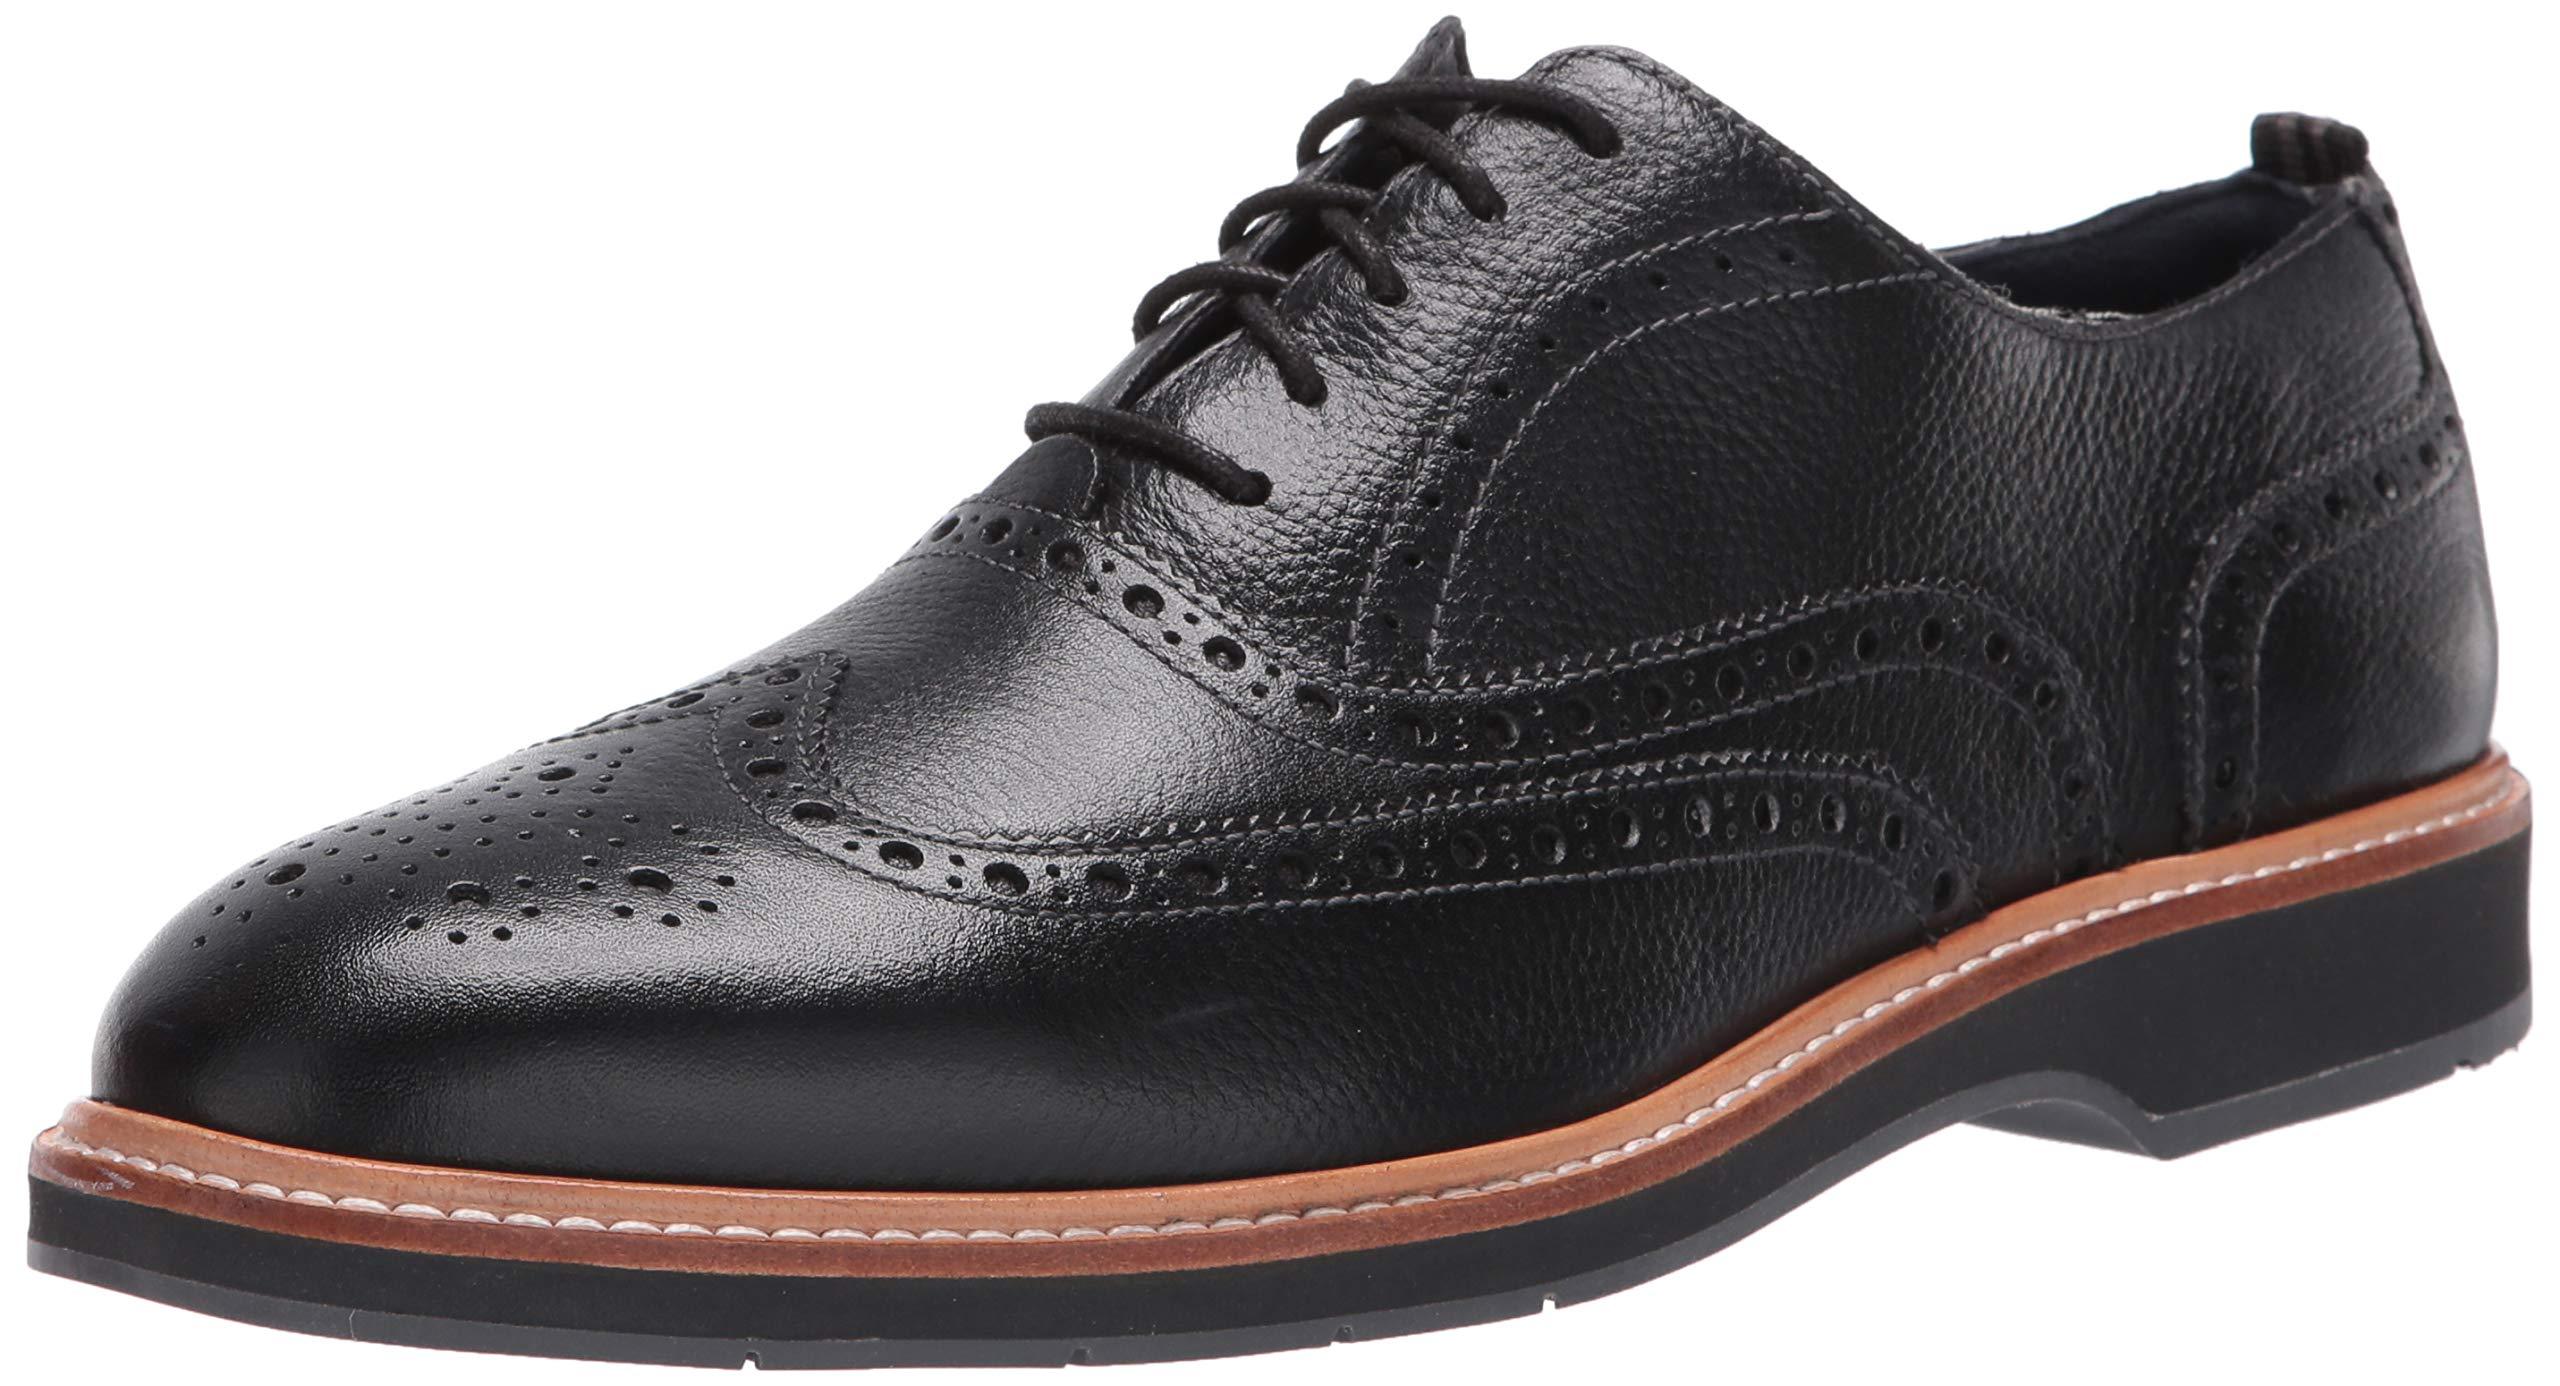 Cole Haan Lace Morris Wing Ox Oxford in Black for Men - Save 55% - Lyst